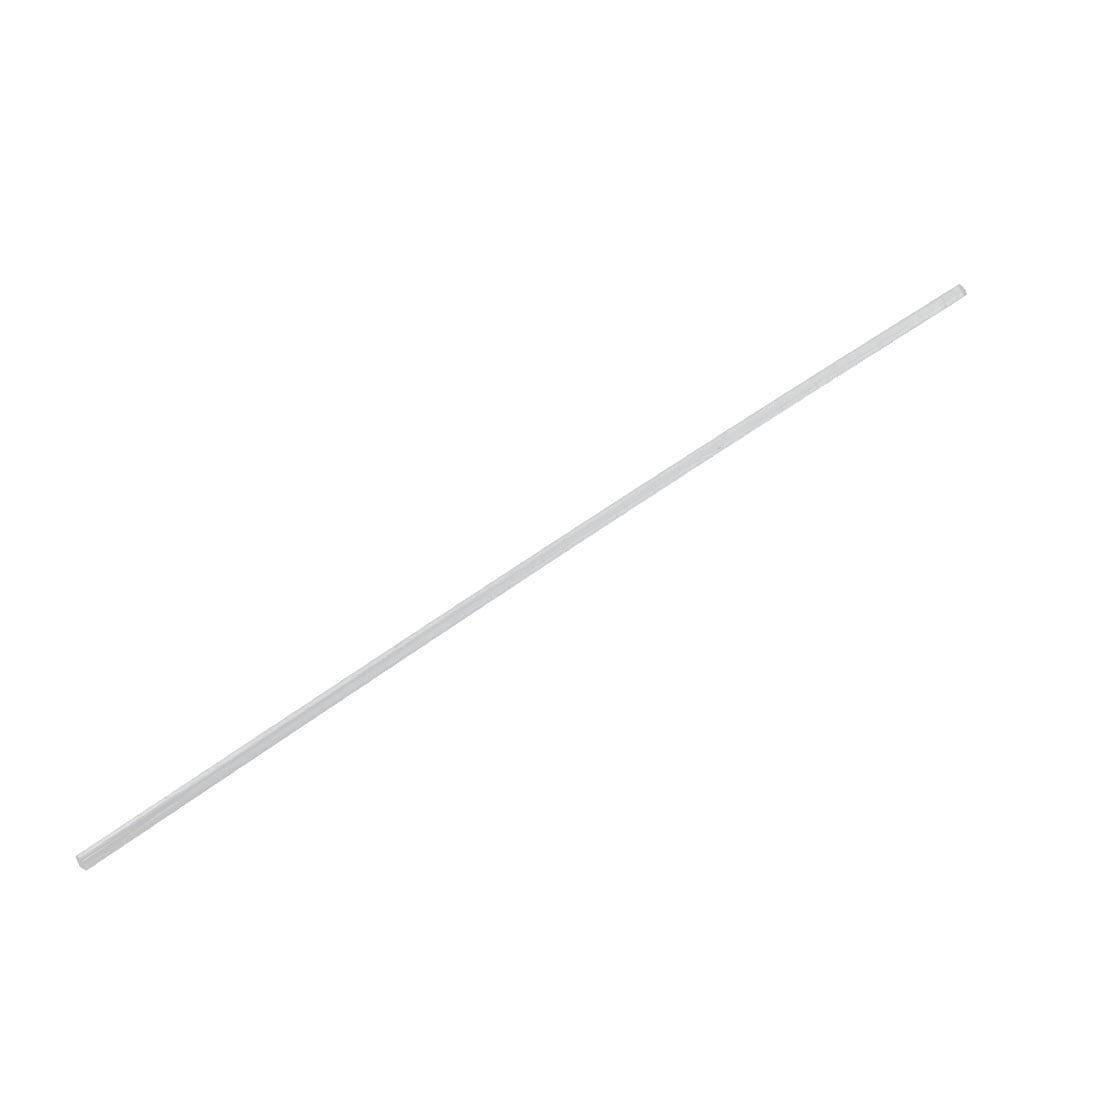 CLEAR ACRYLIC PERSPEX PLASTIC 3mm RODS 10 x 500mm LONG 